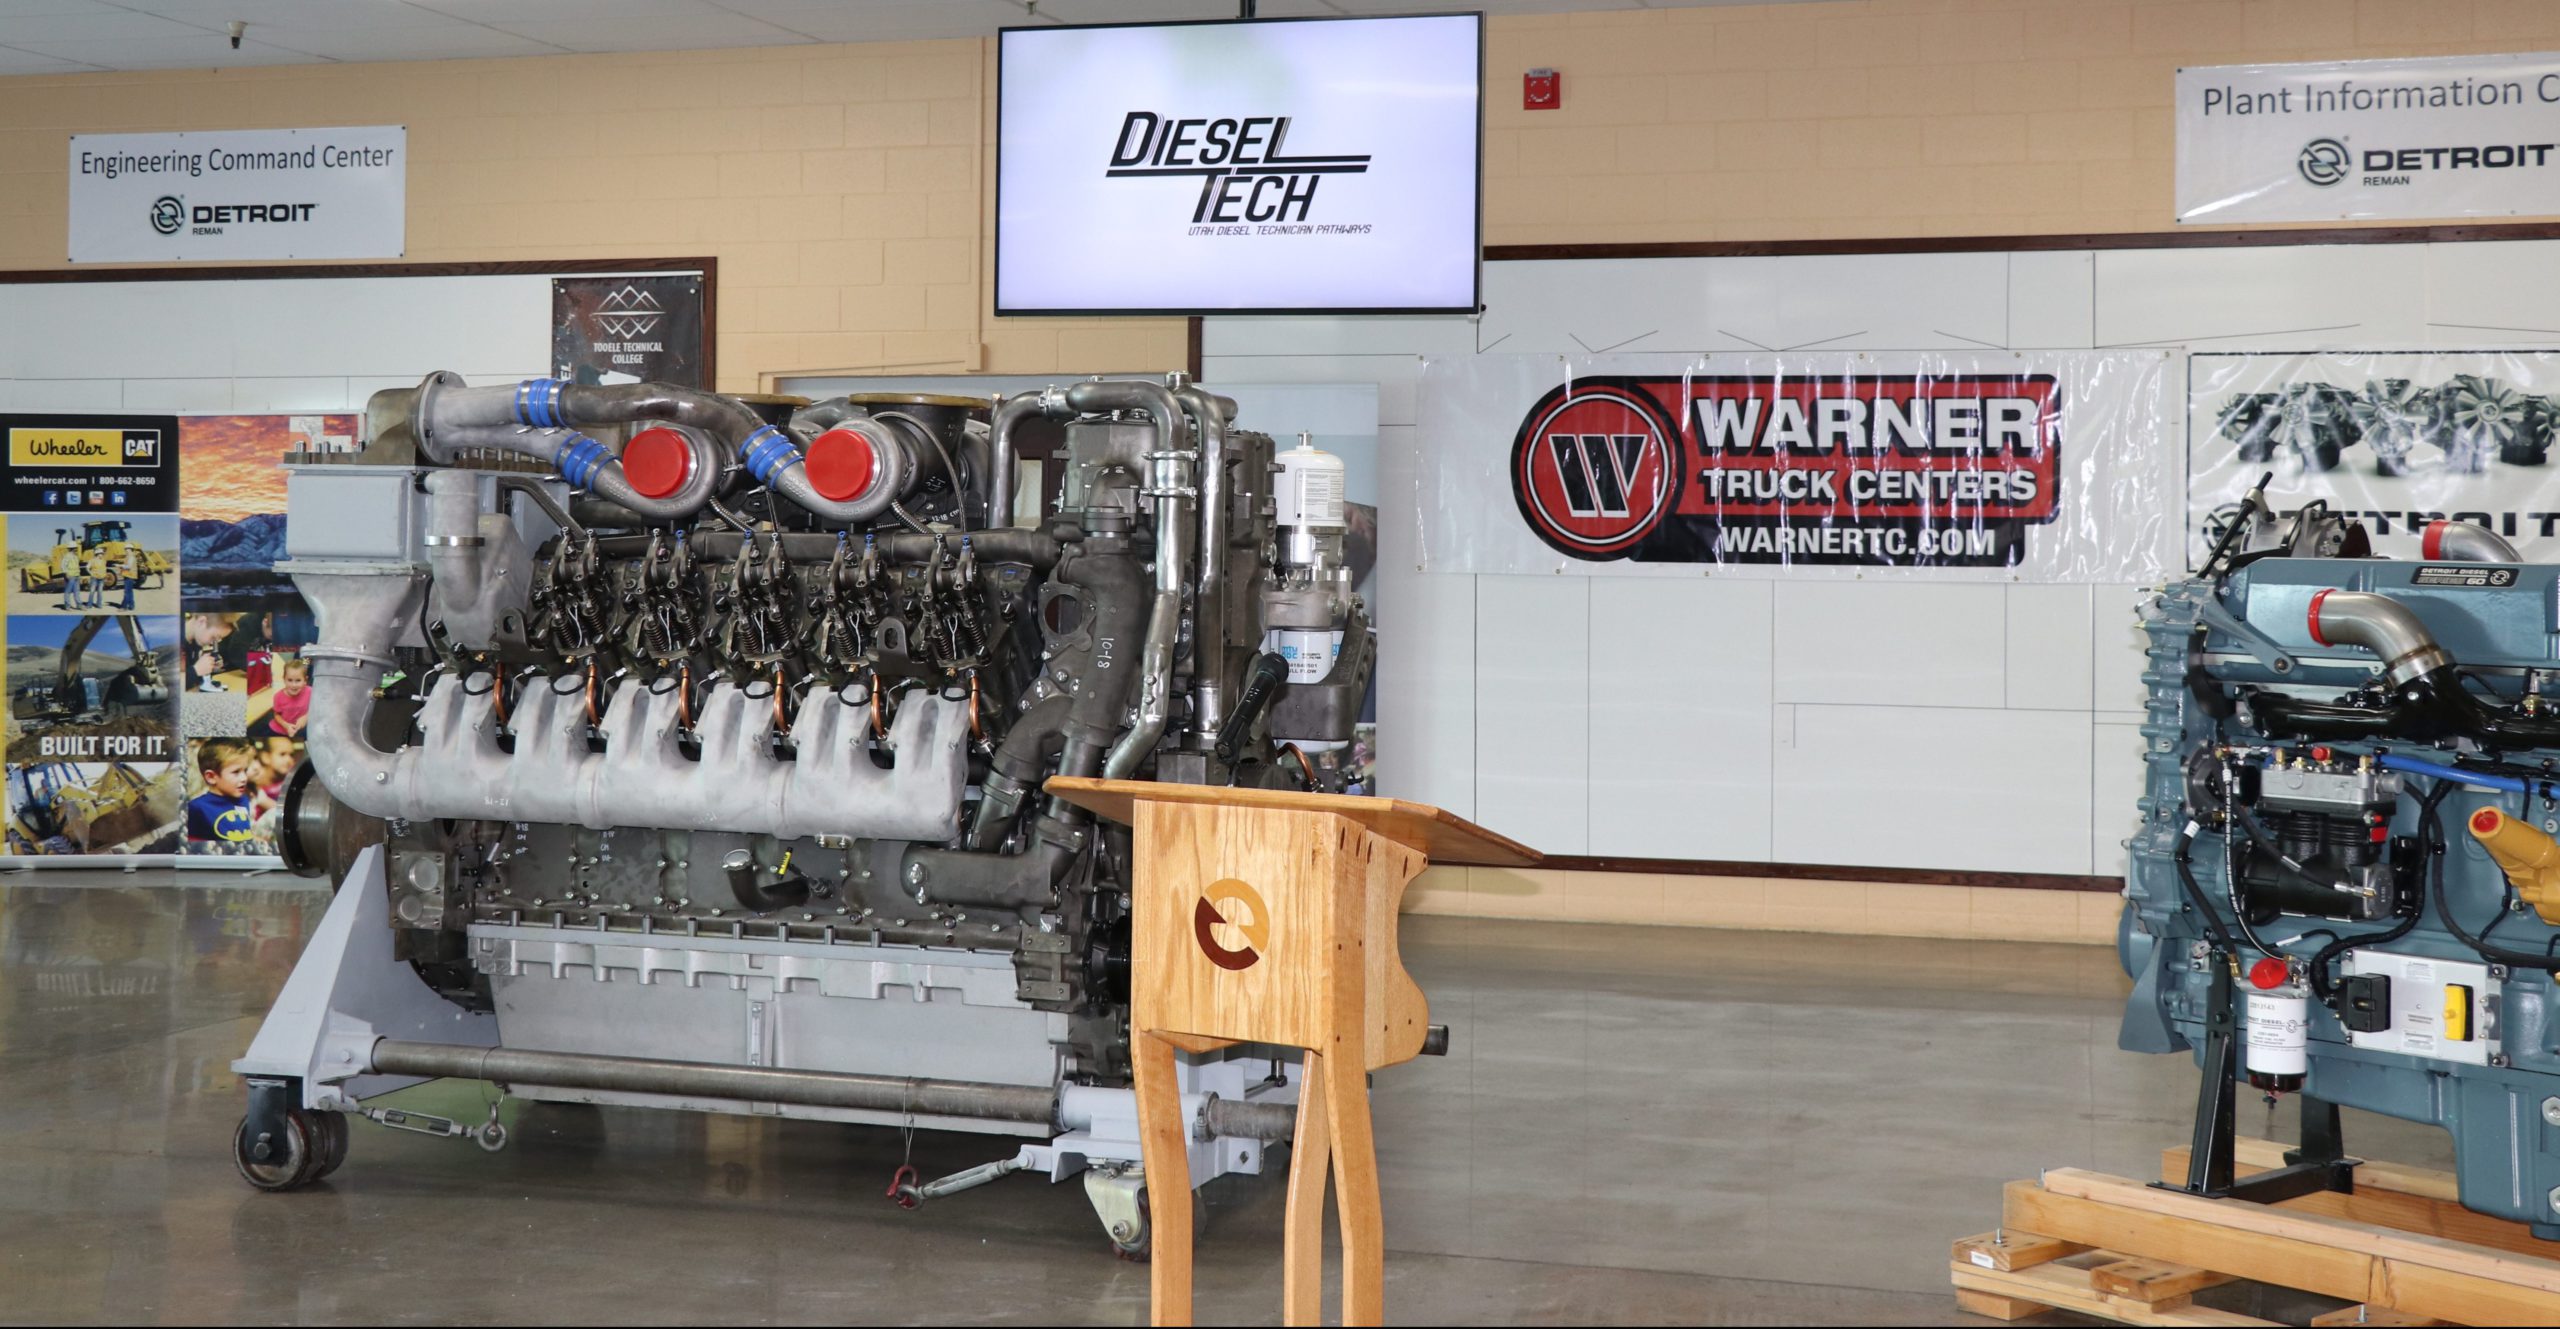 Featured image for “Diesel Tech Pathways Program Shifts Into High Gear Expanding into Two Counties”